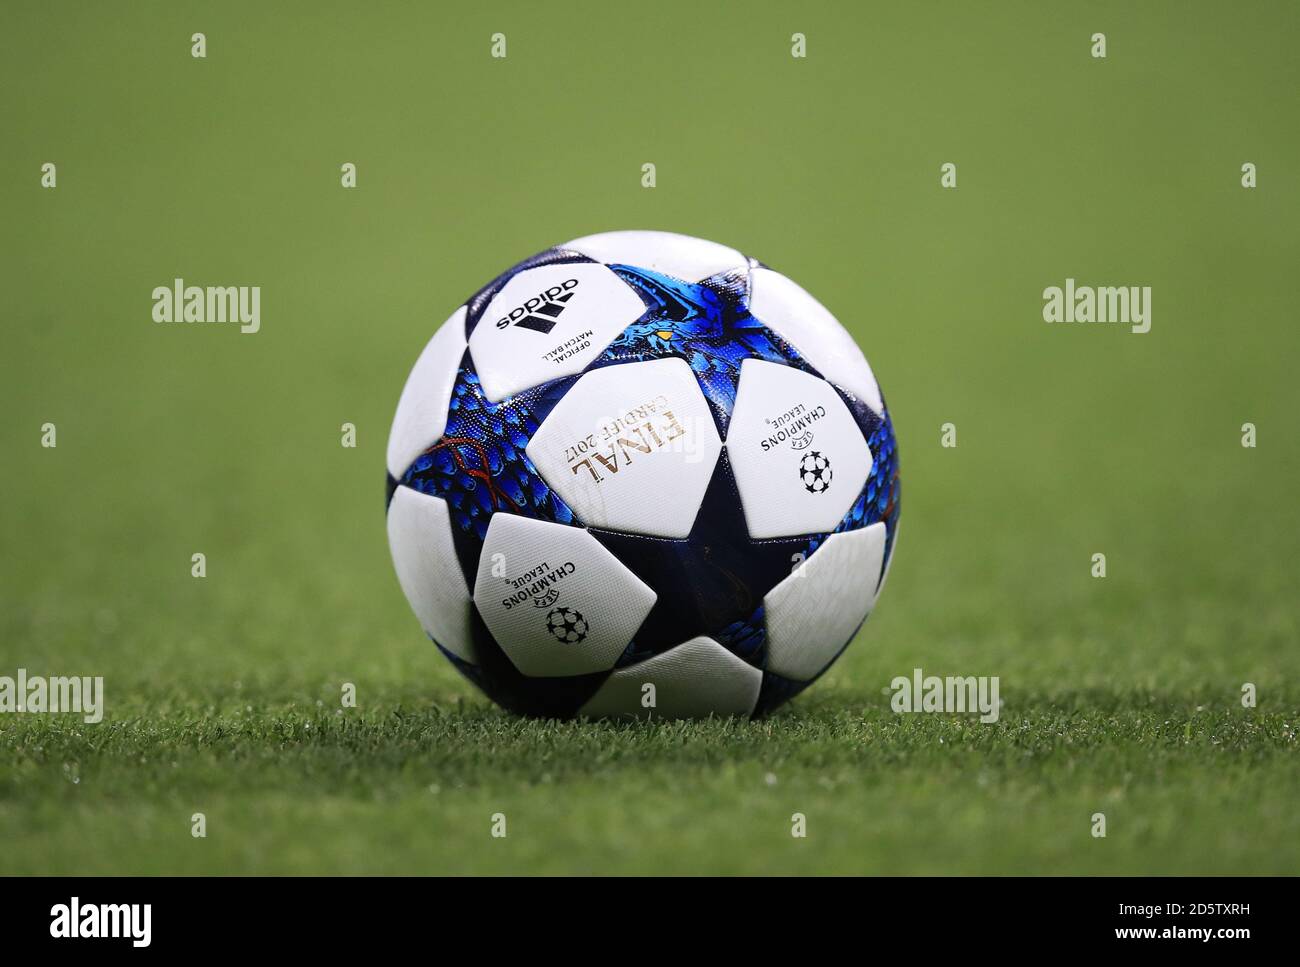 Adidas Champions League Ball High Resolution Stock Photography and Images -  Alamy